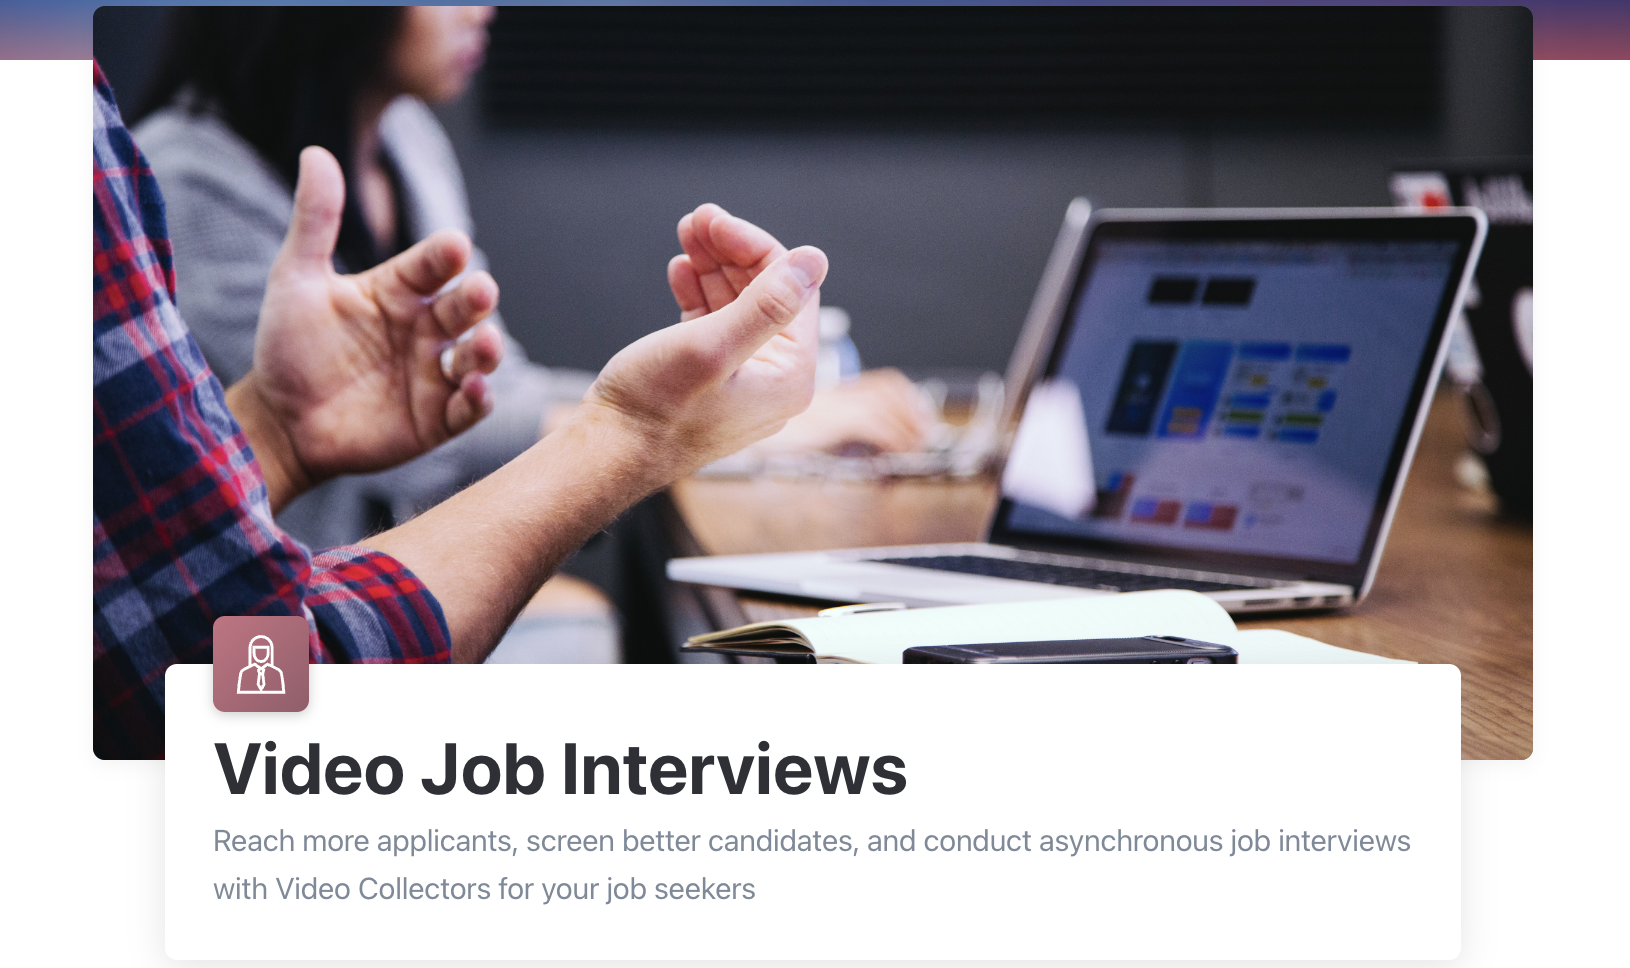 Video job interview templates page. 